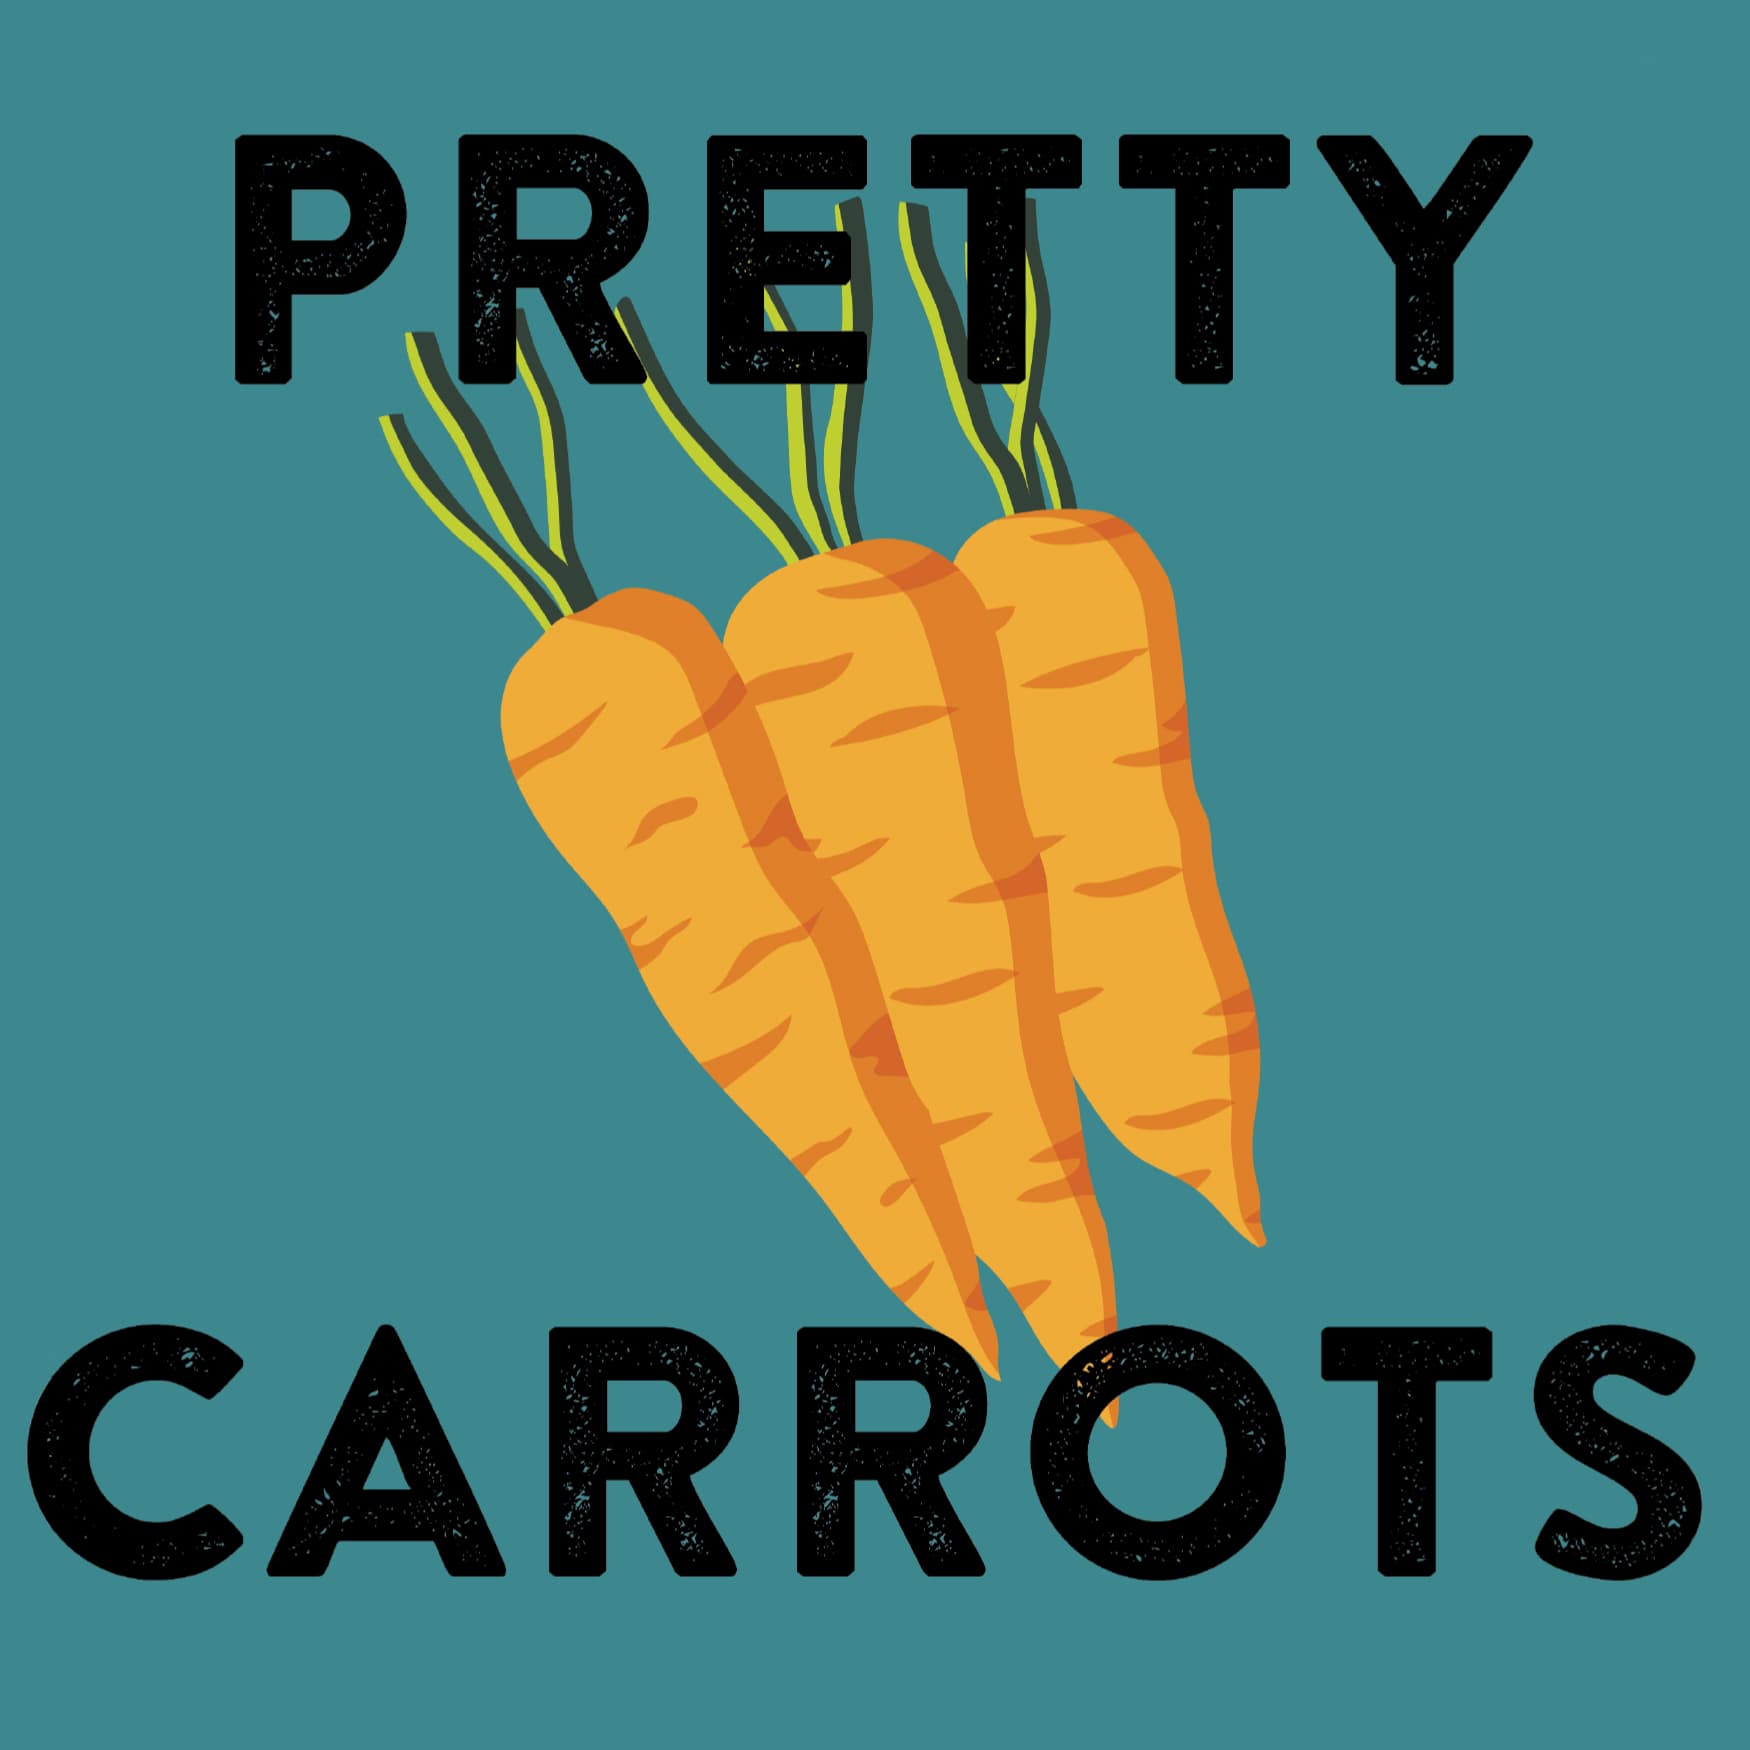 Blue green graphic with text reading "pretty carrots" with illustrated carrots. 